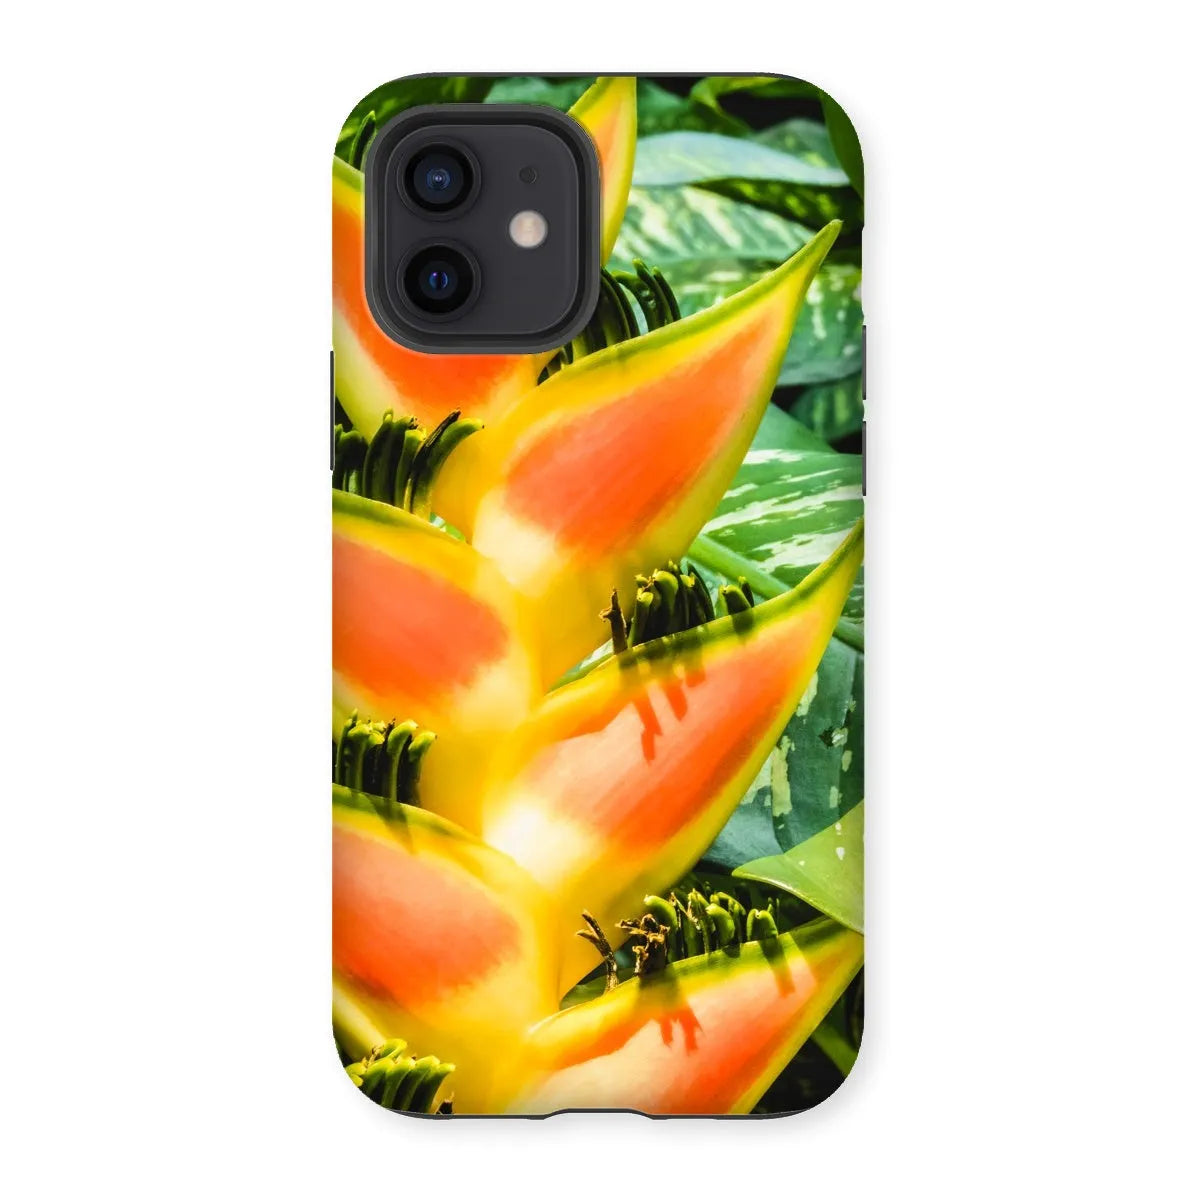 Showstopper Tough Phone Case - Iphone 12 / Matte - Mobile Phone Cases - Aesthetic Art